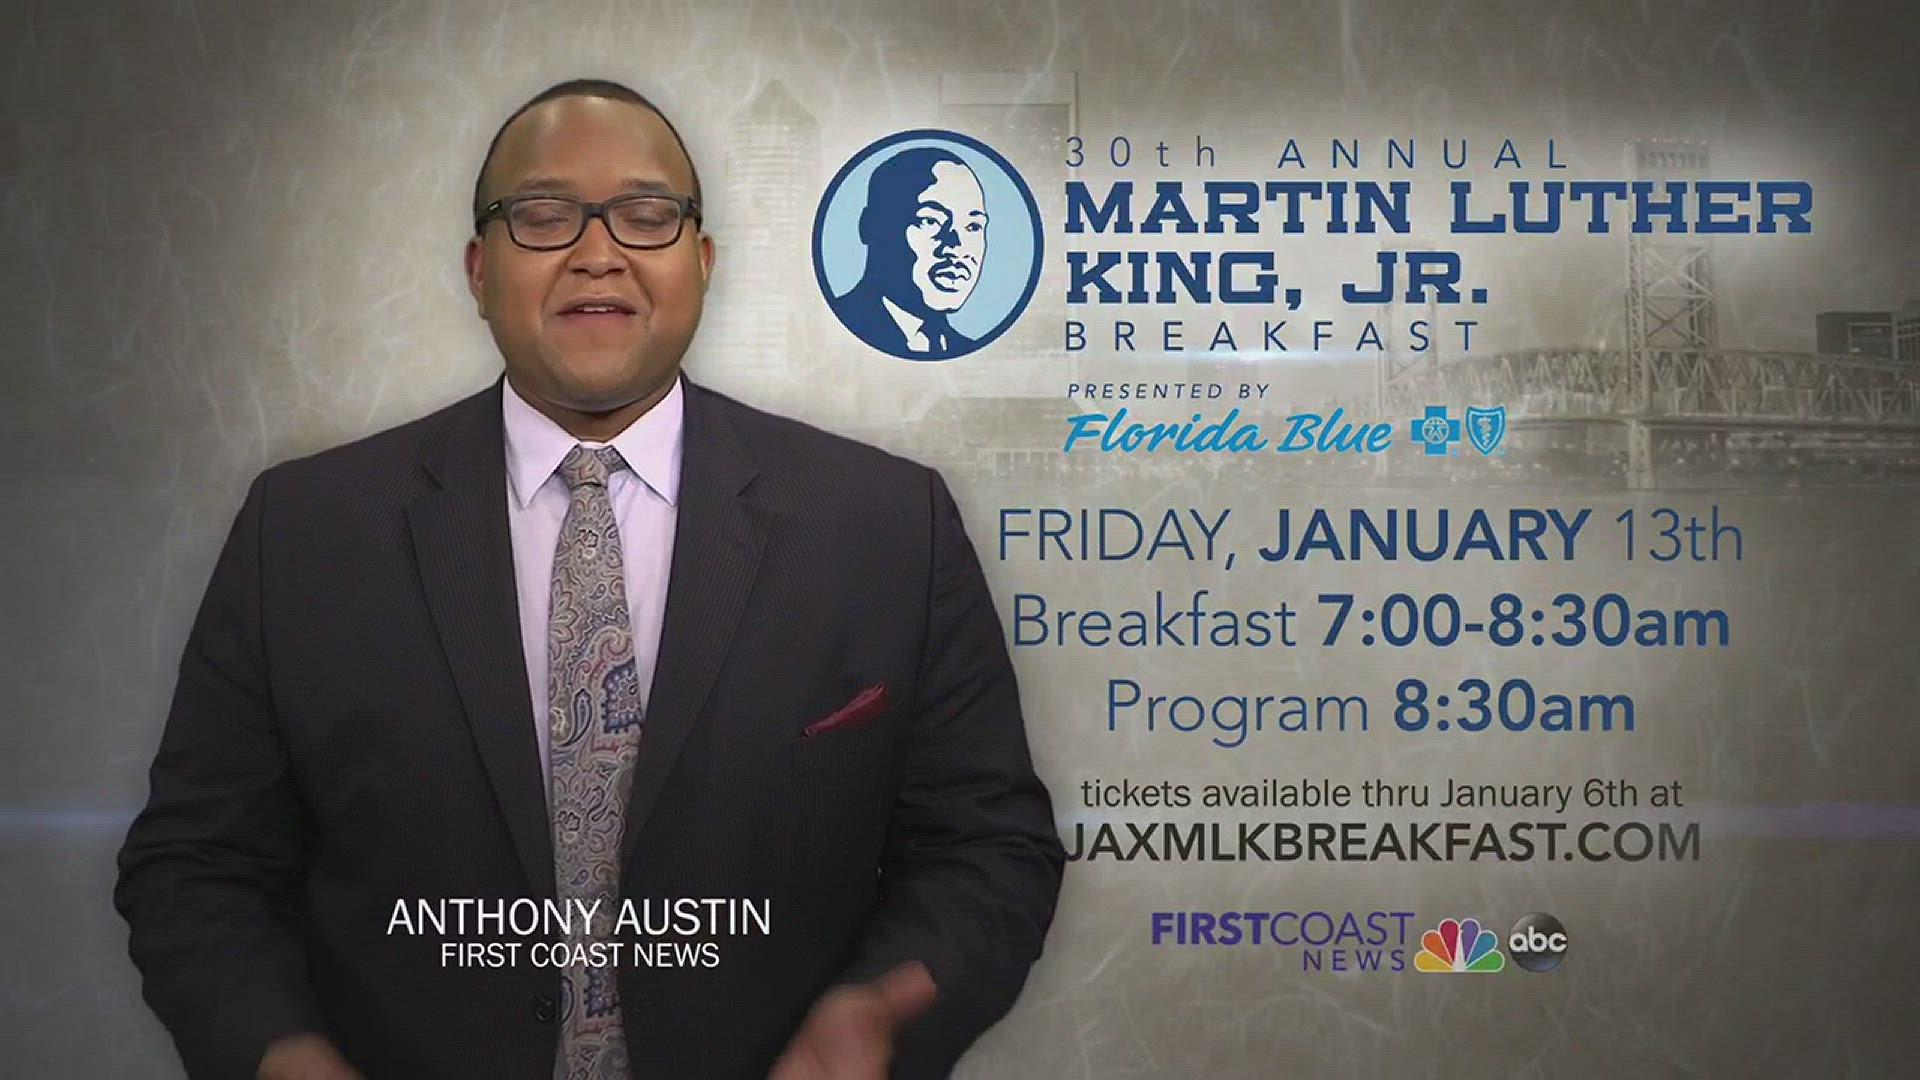 Join FCN's Anthony Austin and Florida Blue for the 30th Annual Martin Luther King, Jr. Breakfast Friday, January 13th.